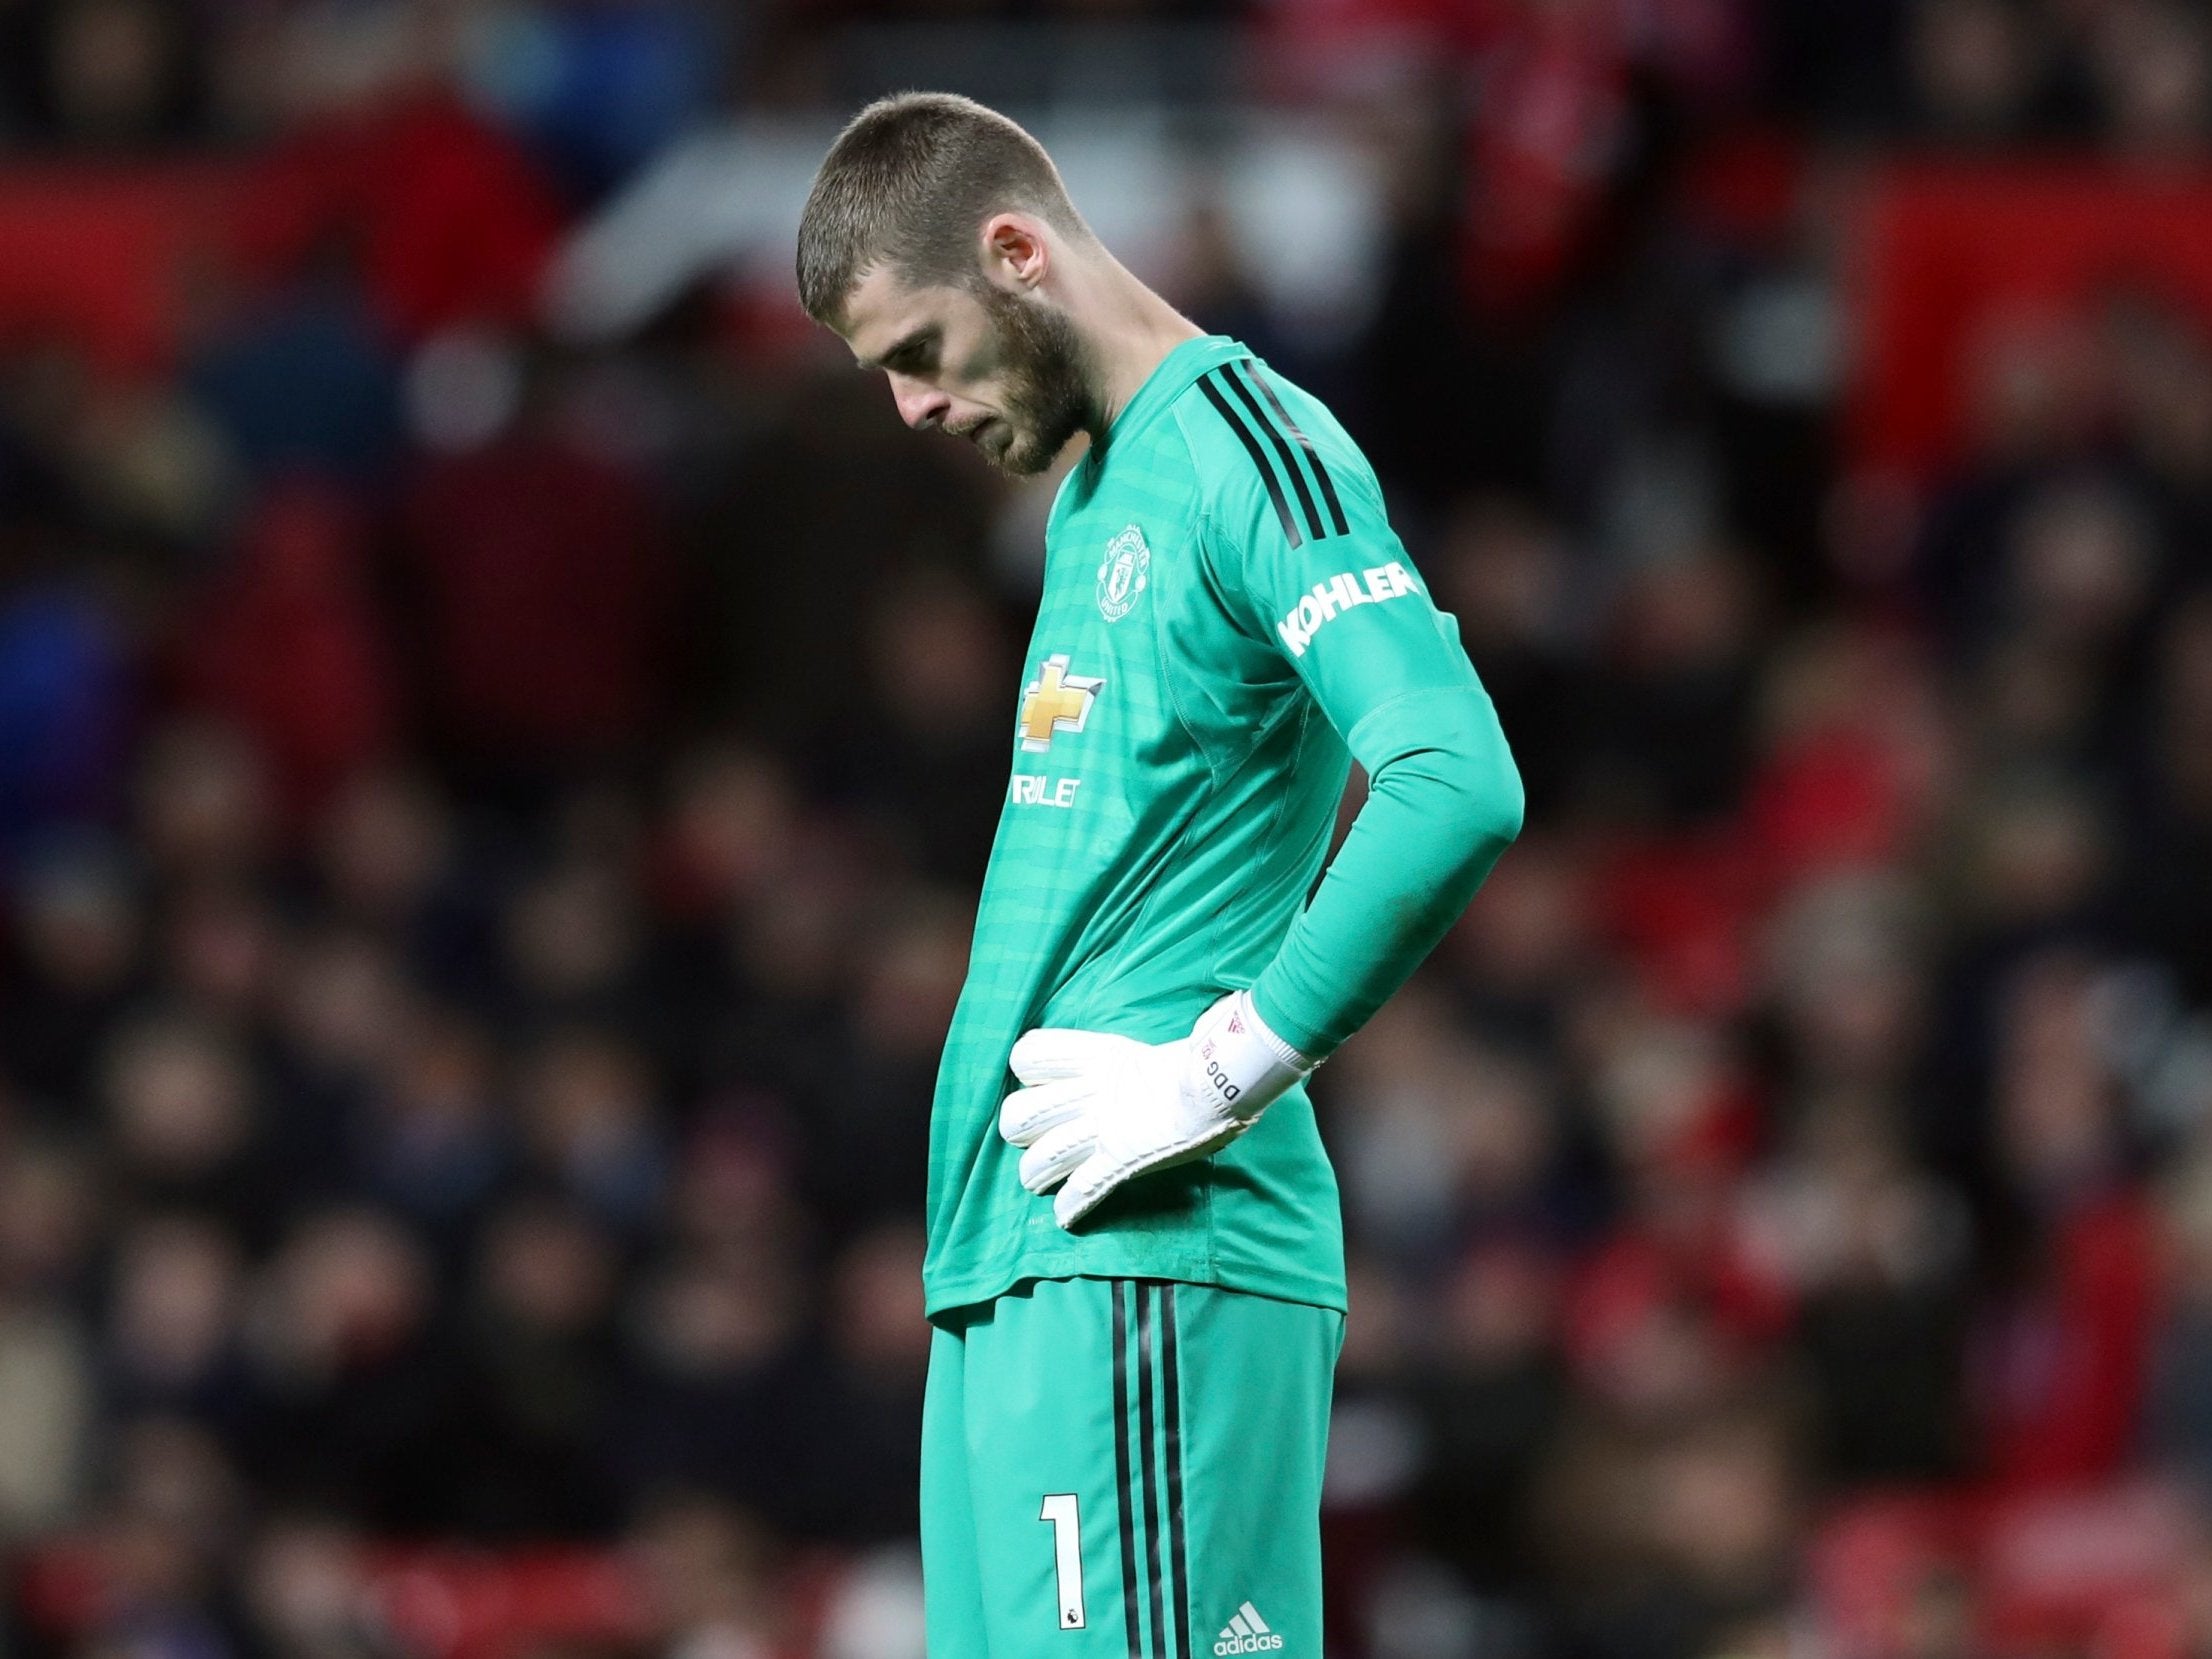 Dde Gea's form has come under question after high-profile mistakes for United